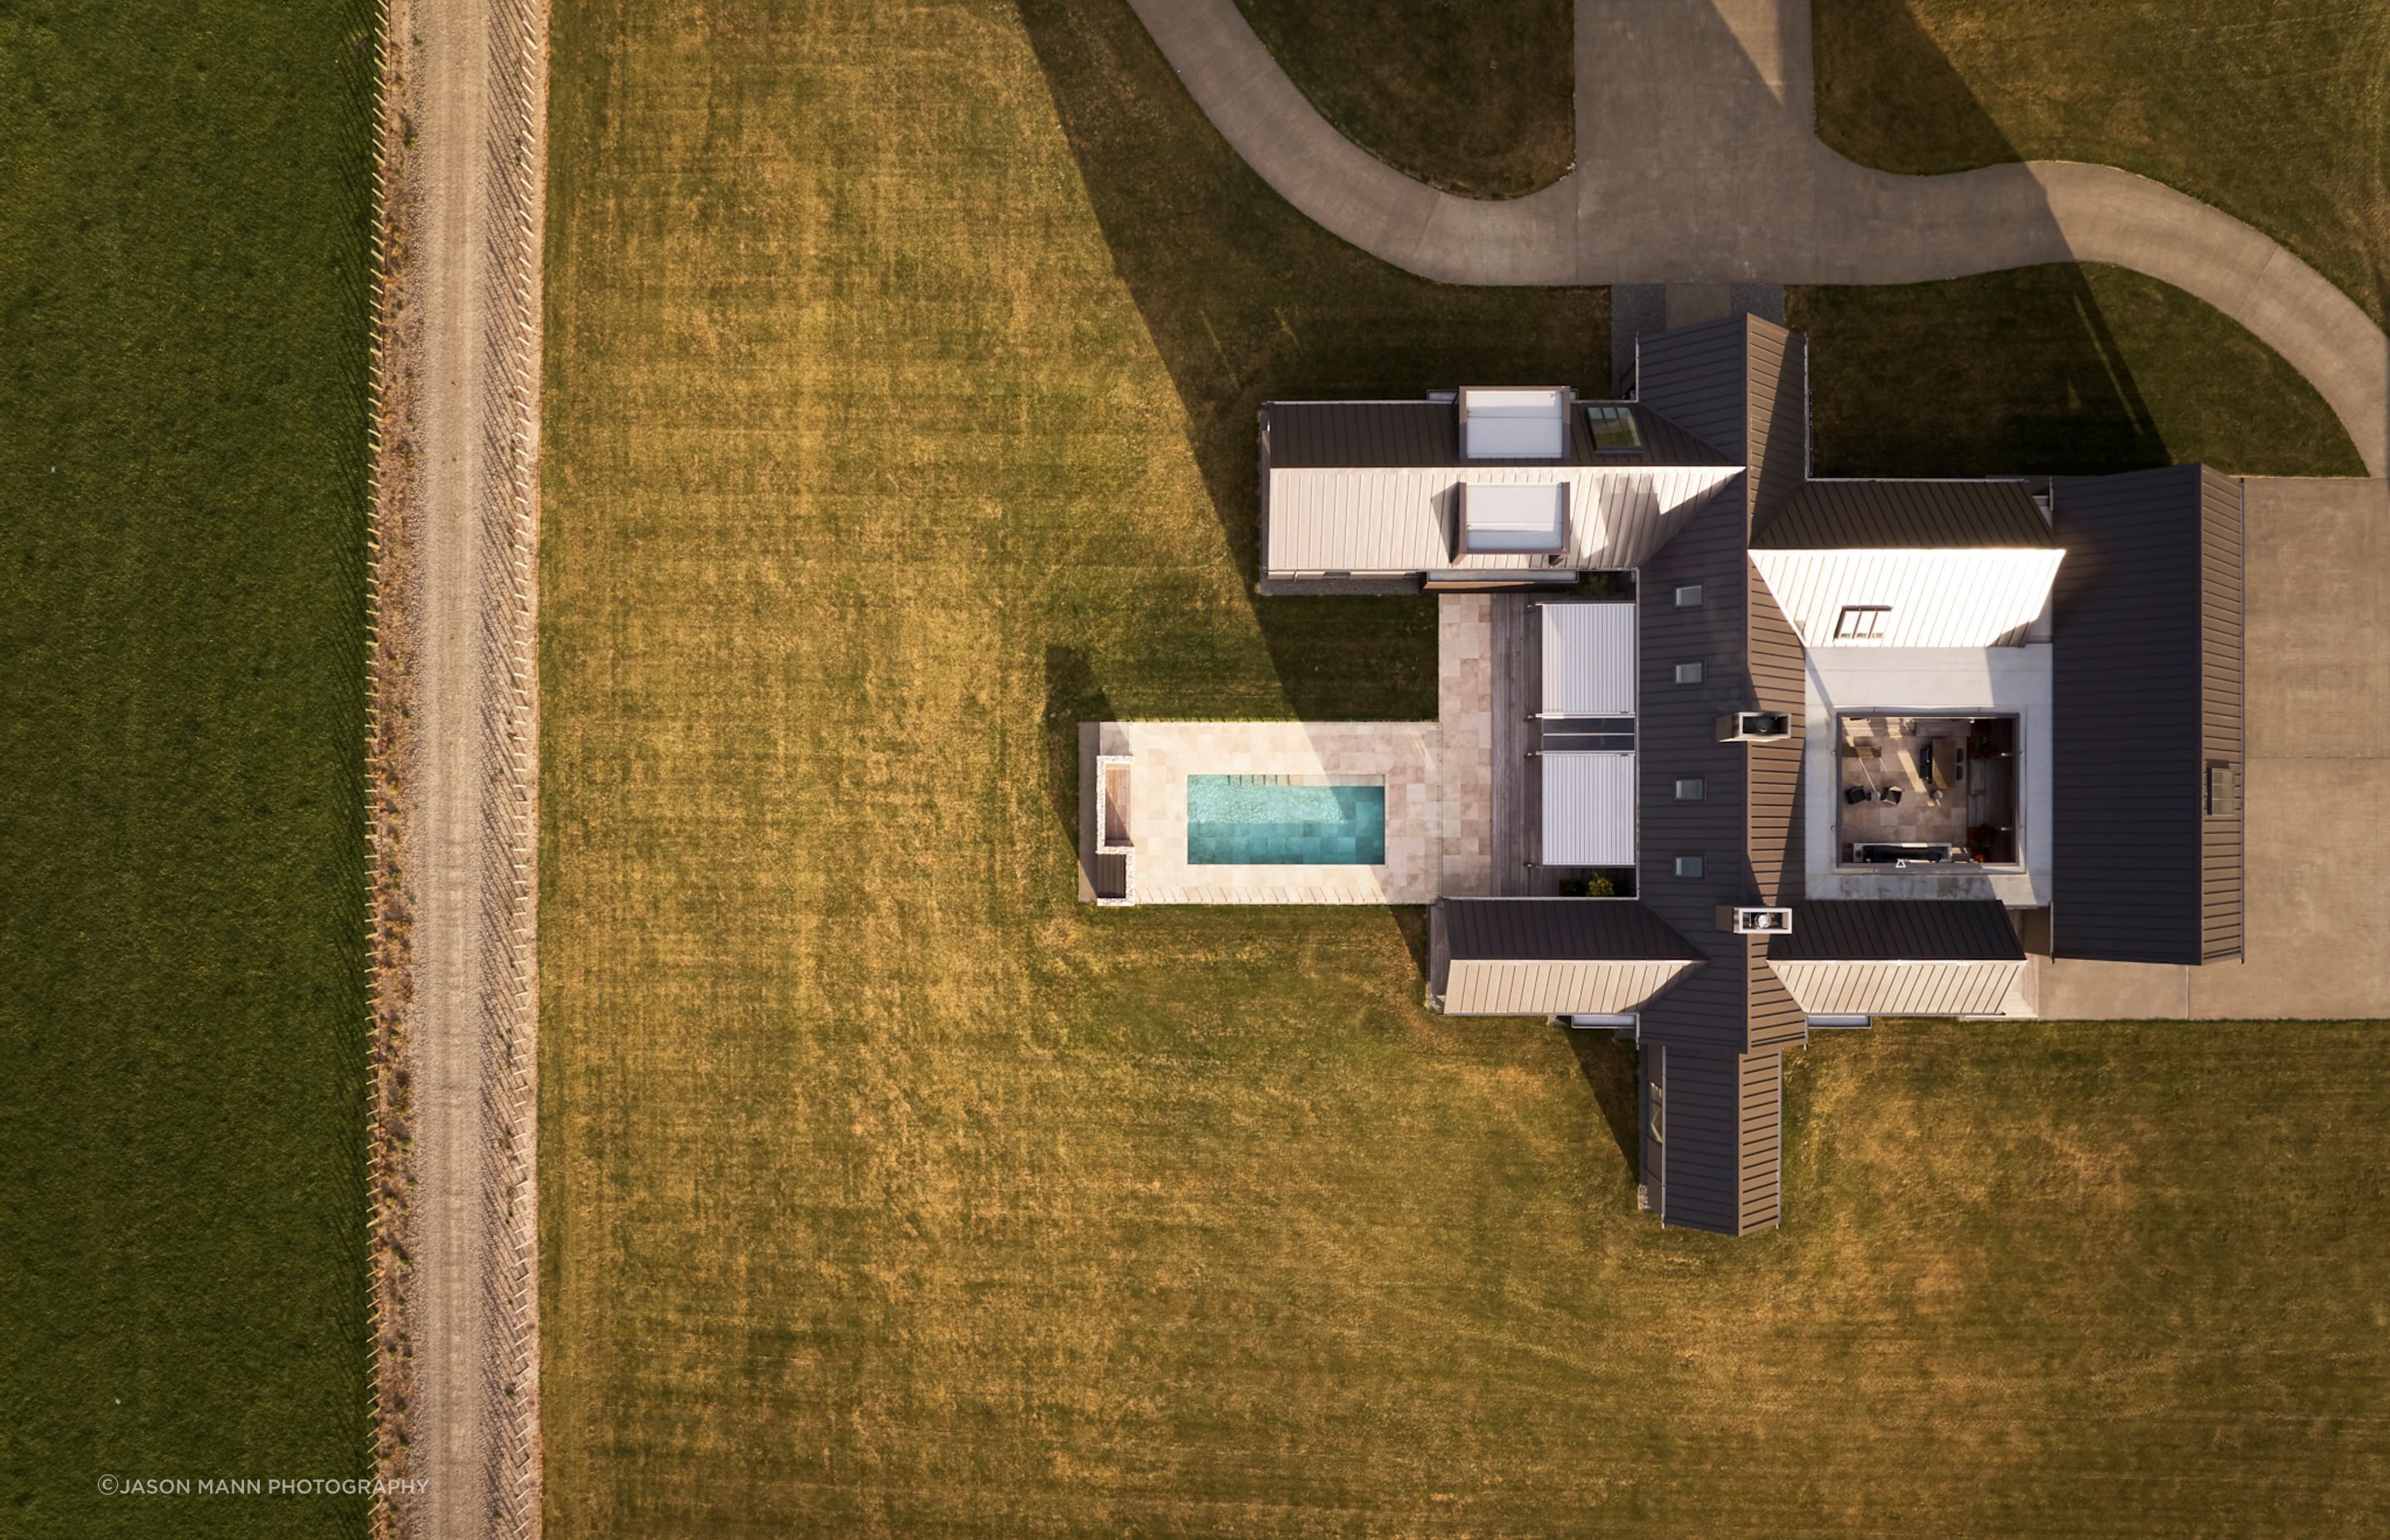 From above, you can see the form of the home protects the internal courtyard,